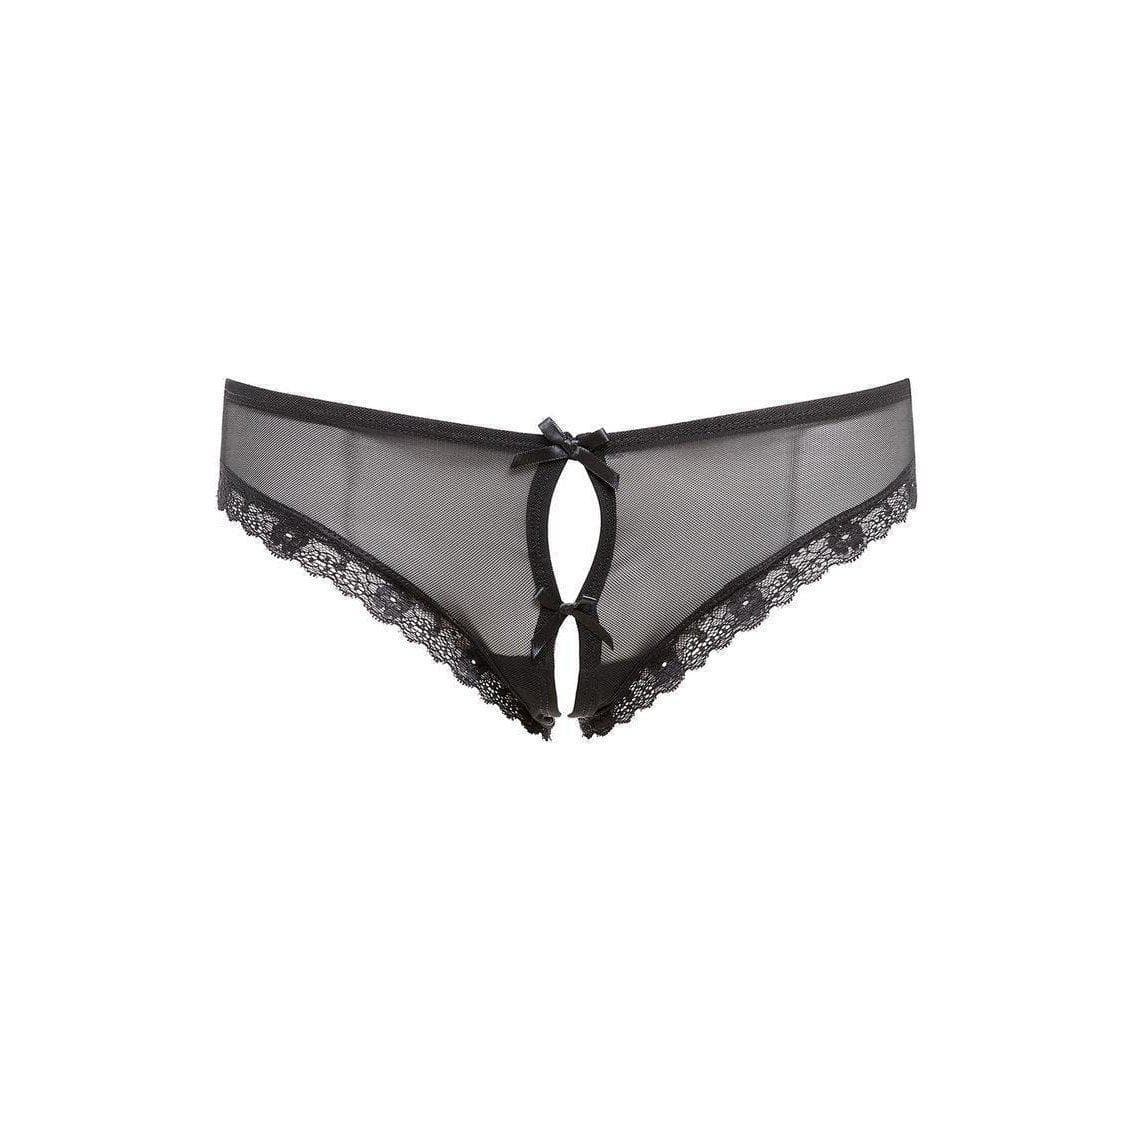 Barely Bare Double Window Panty Black One Size - Romantic Blessings